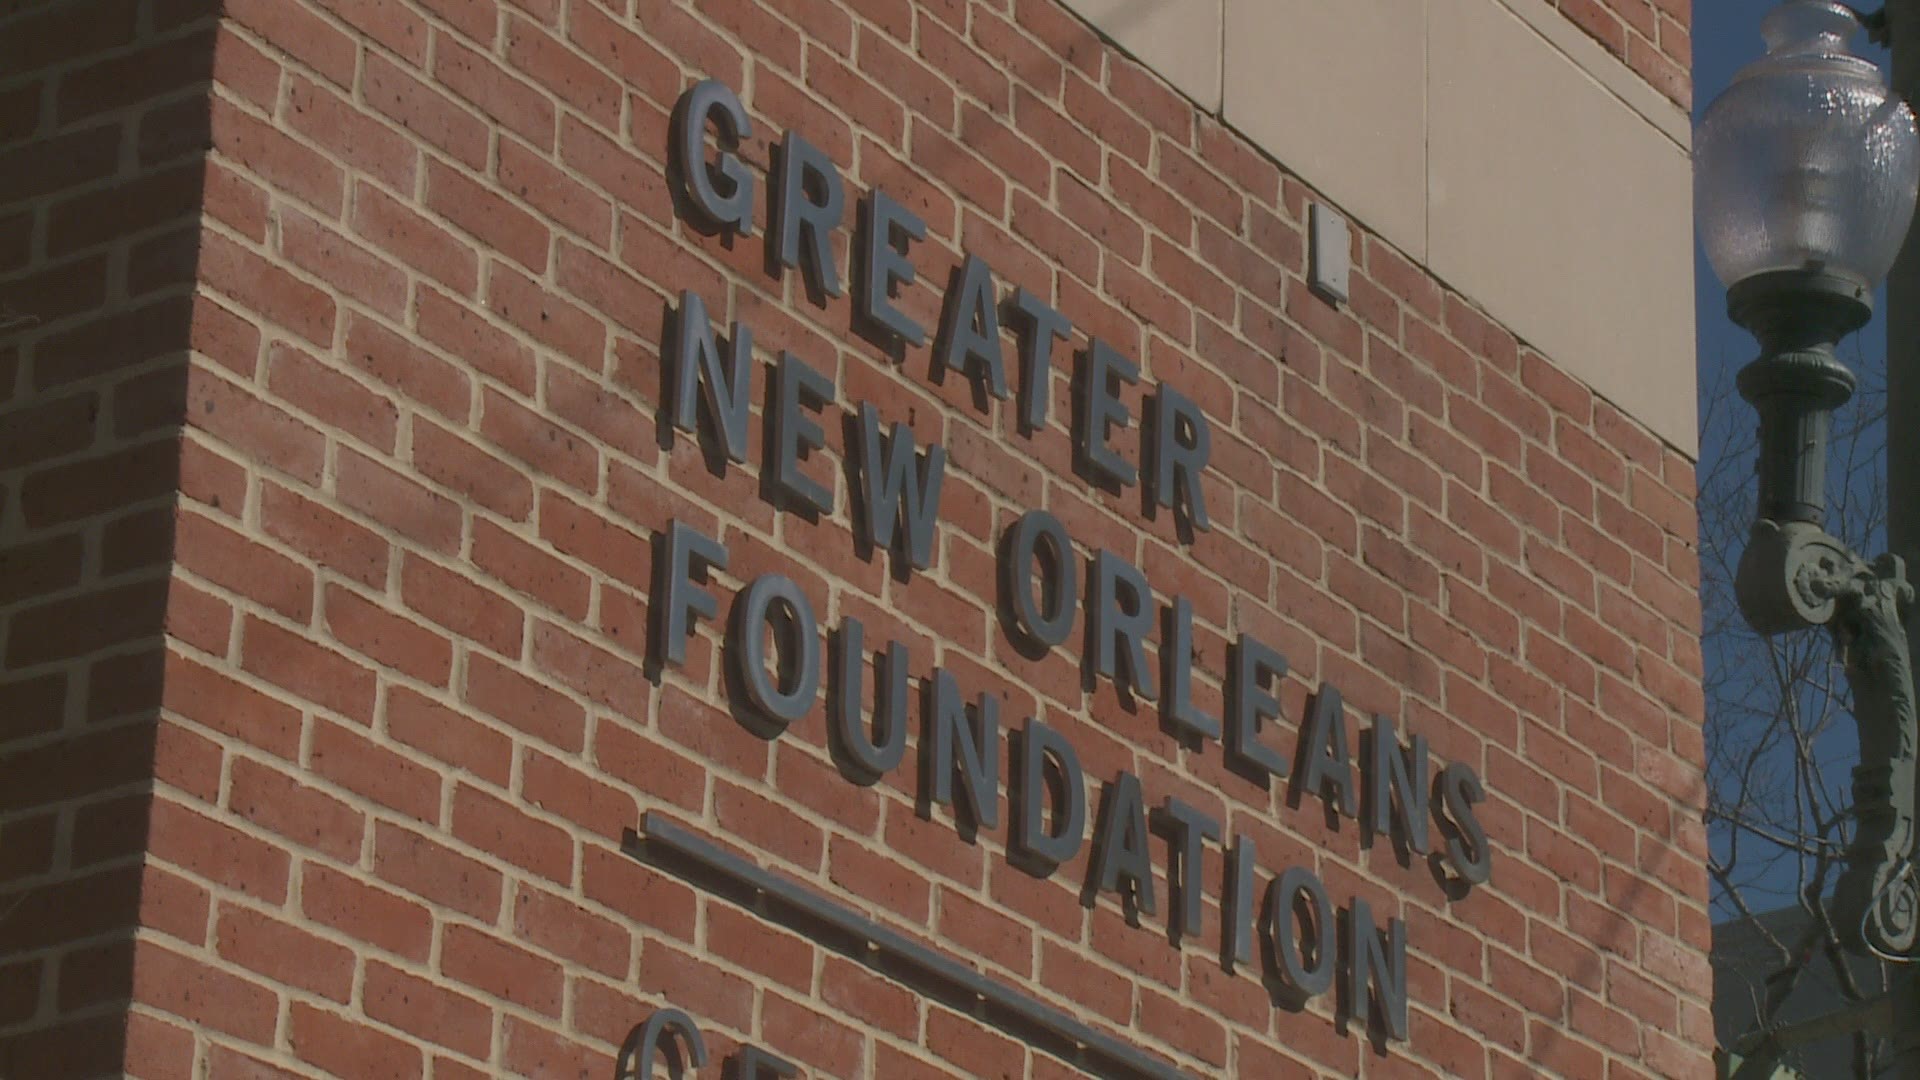 The Greater New Orleans Foundation is helping black-owned businesses thrive by providing grants to those who need them.